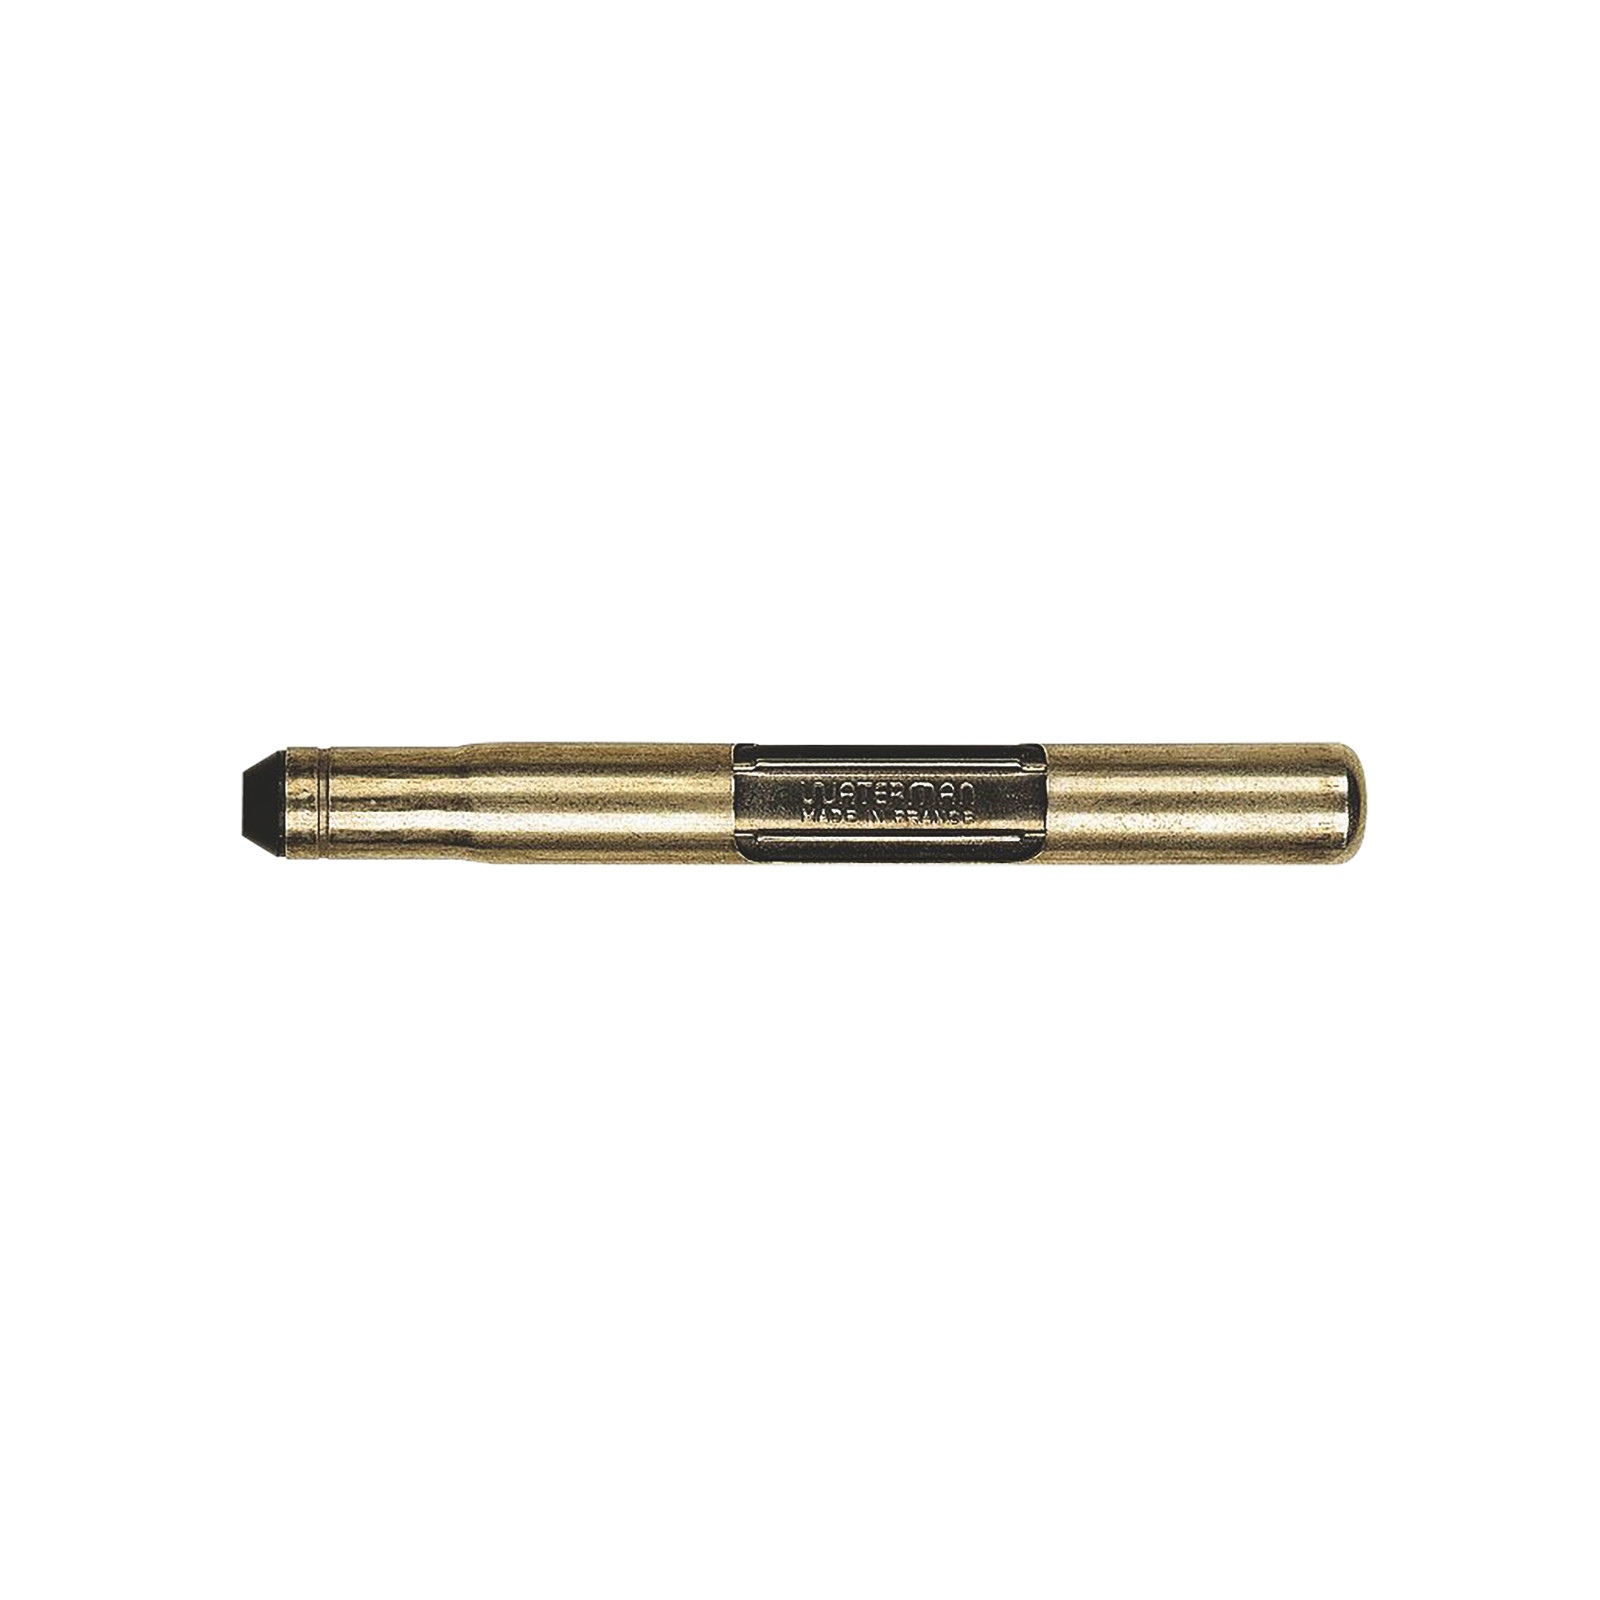 Waterman CF compatable Ballpoint Refill